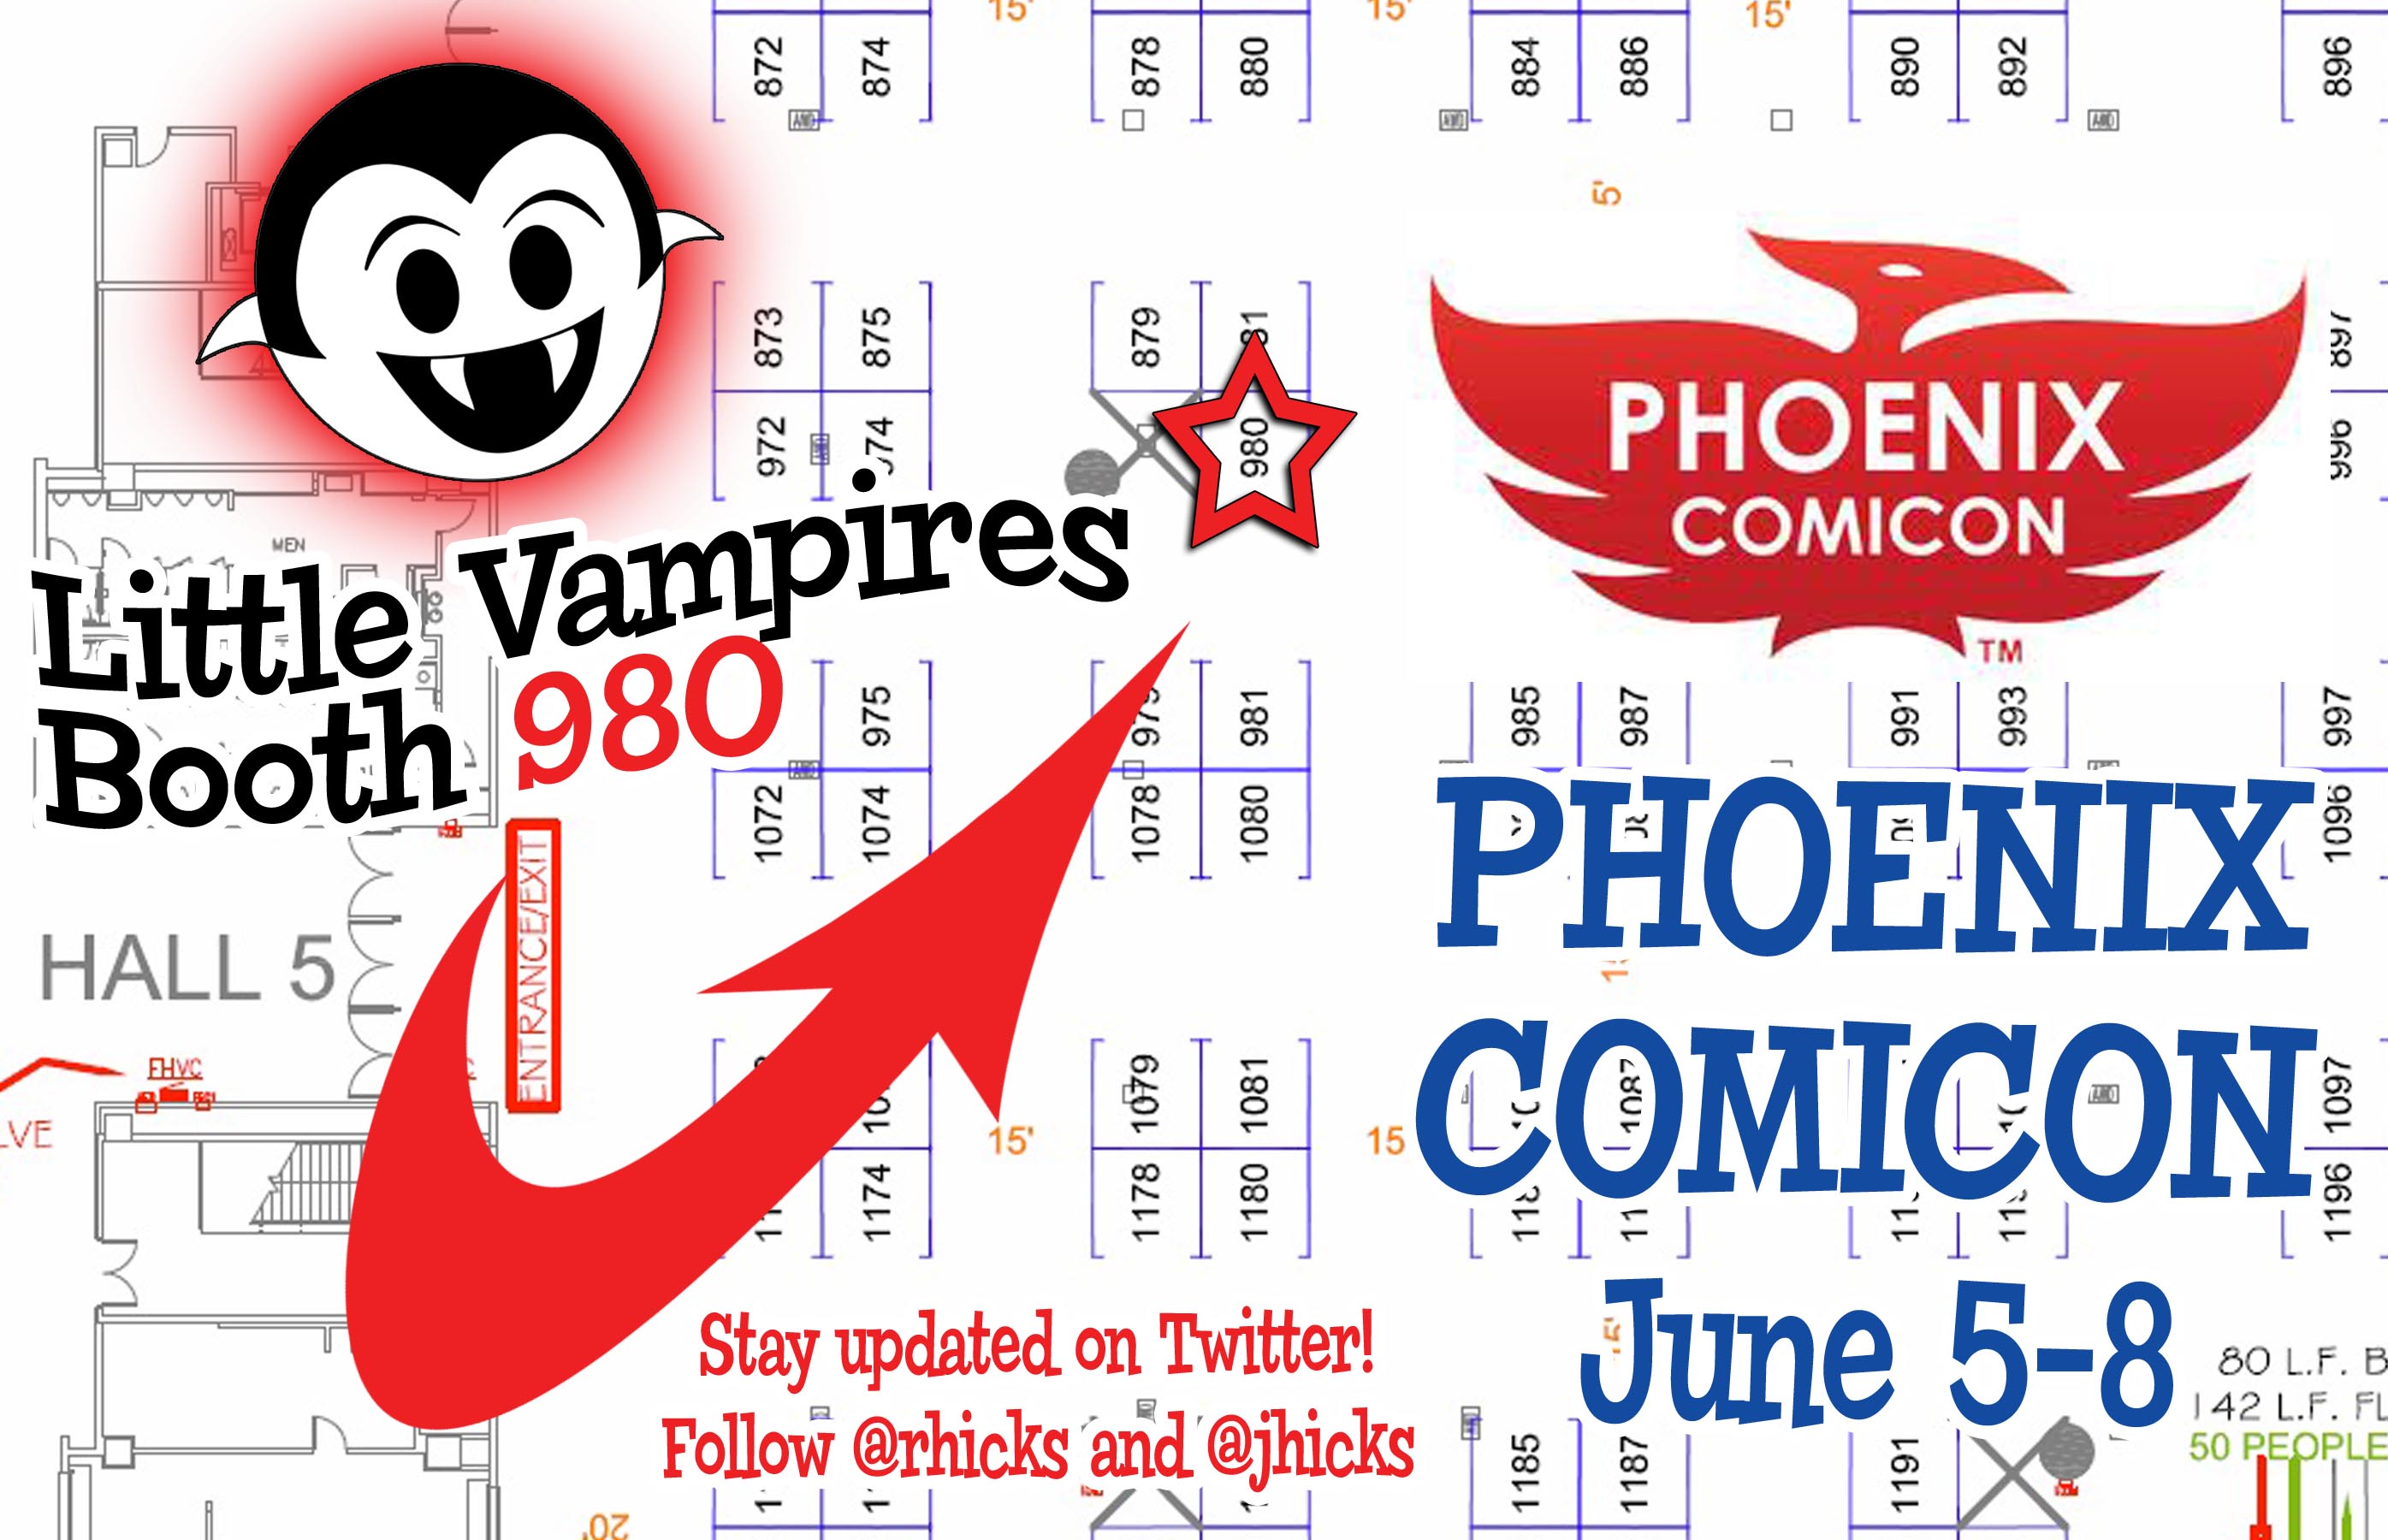 Phoenix Comicon 2014 exhibitor floor map with the Little Vampires booth highlighted